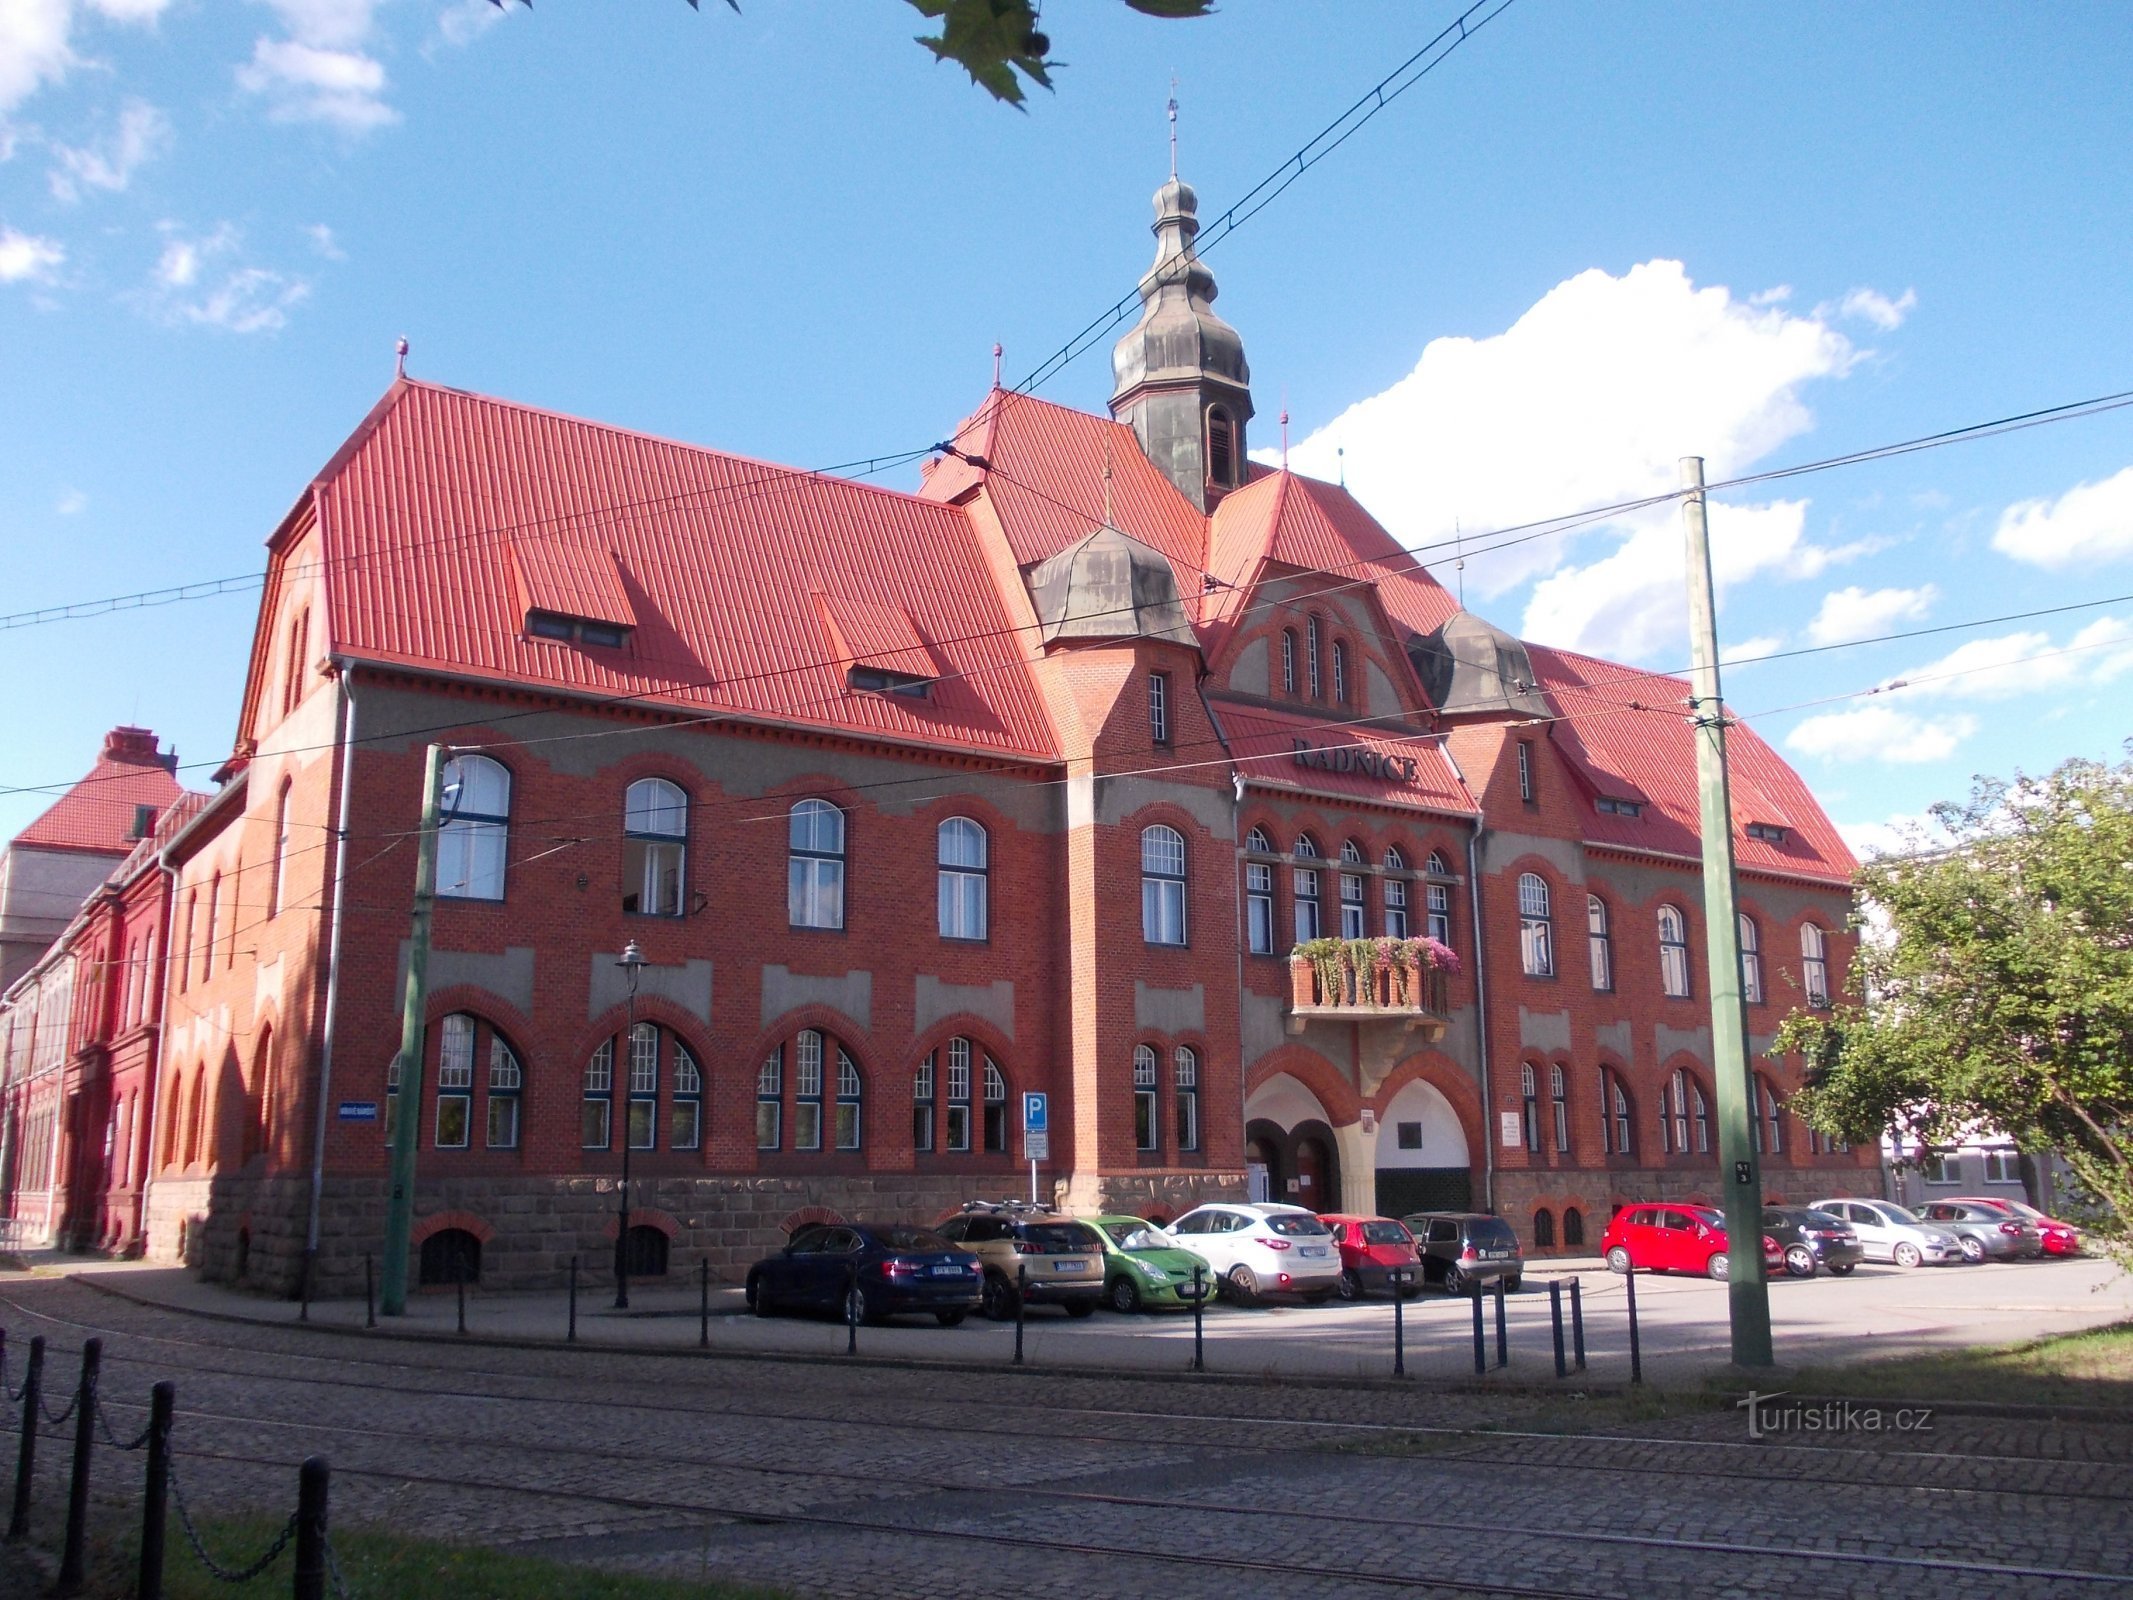 Vítkovice Town Hall built in 1901 - 1902